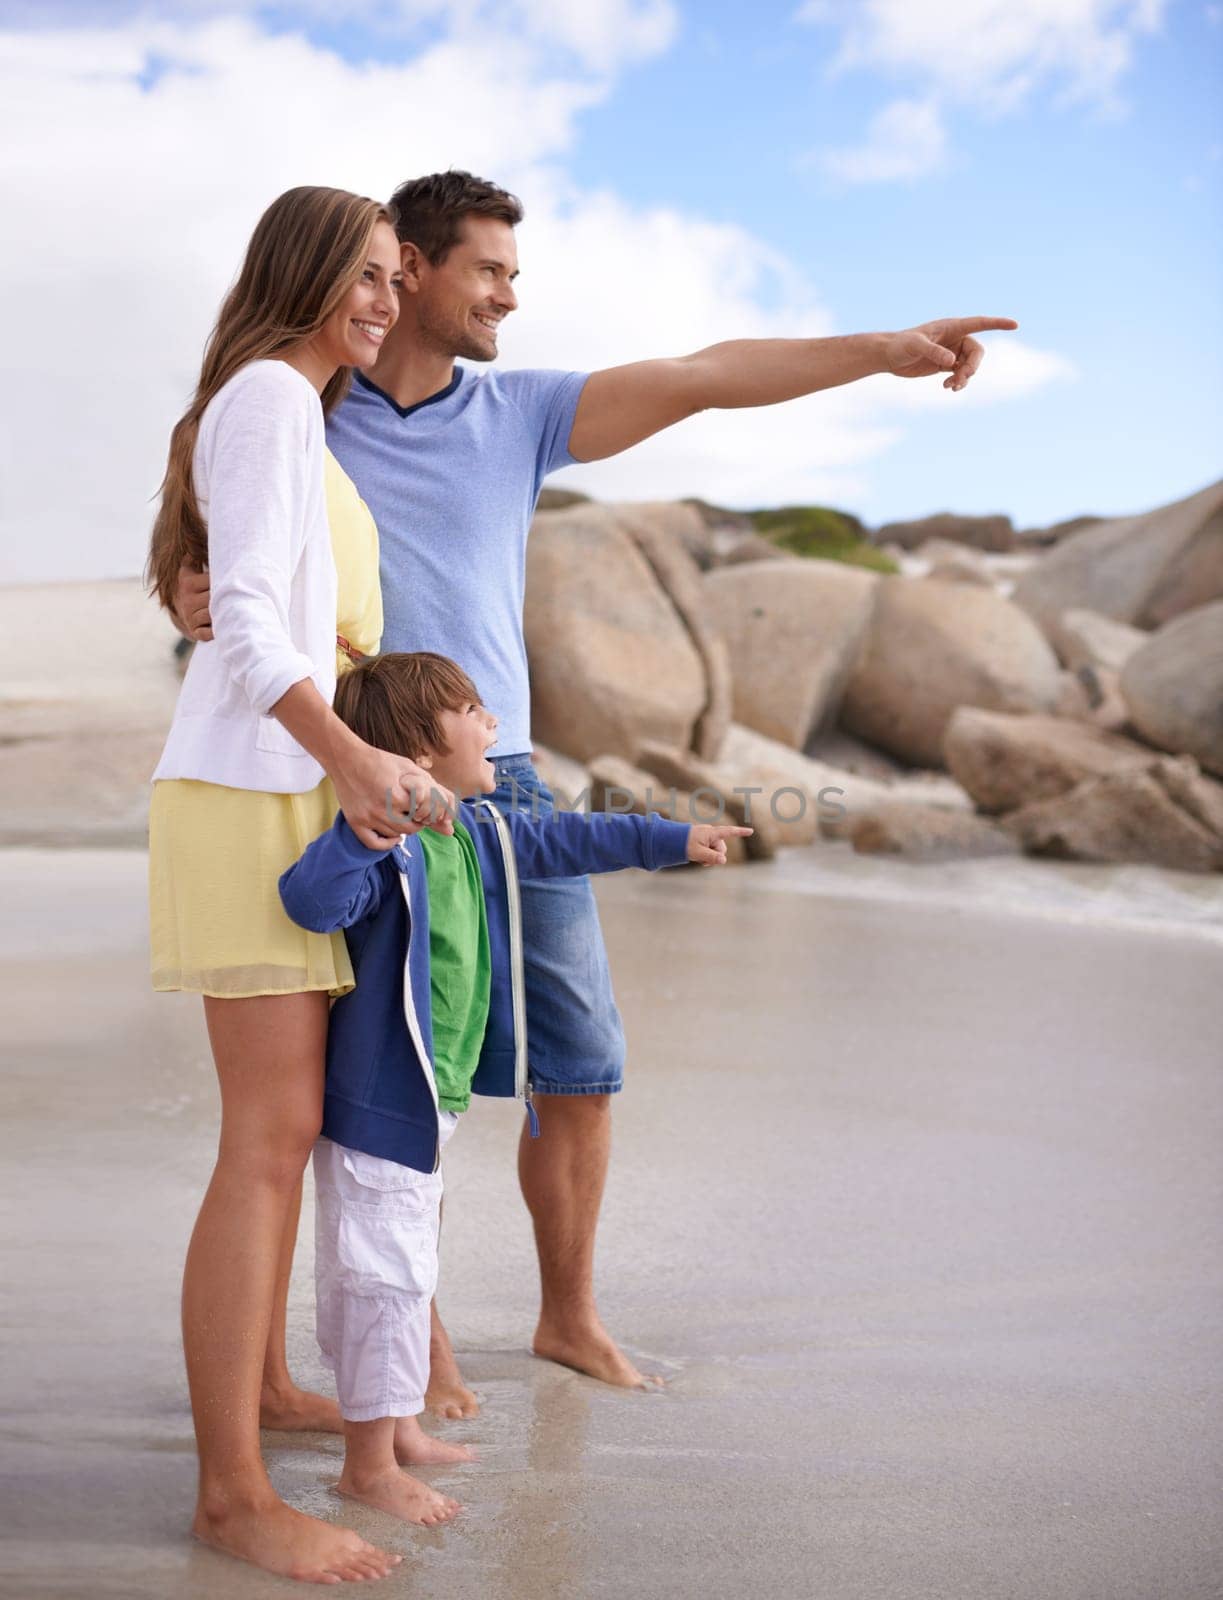 Family, child and pointing outdoor at beach for travel, adventure or holiday in summer with a smile. A man, woman and kid or son together on vacation at sea for blue sky, learning and happiness.